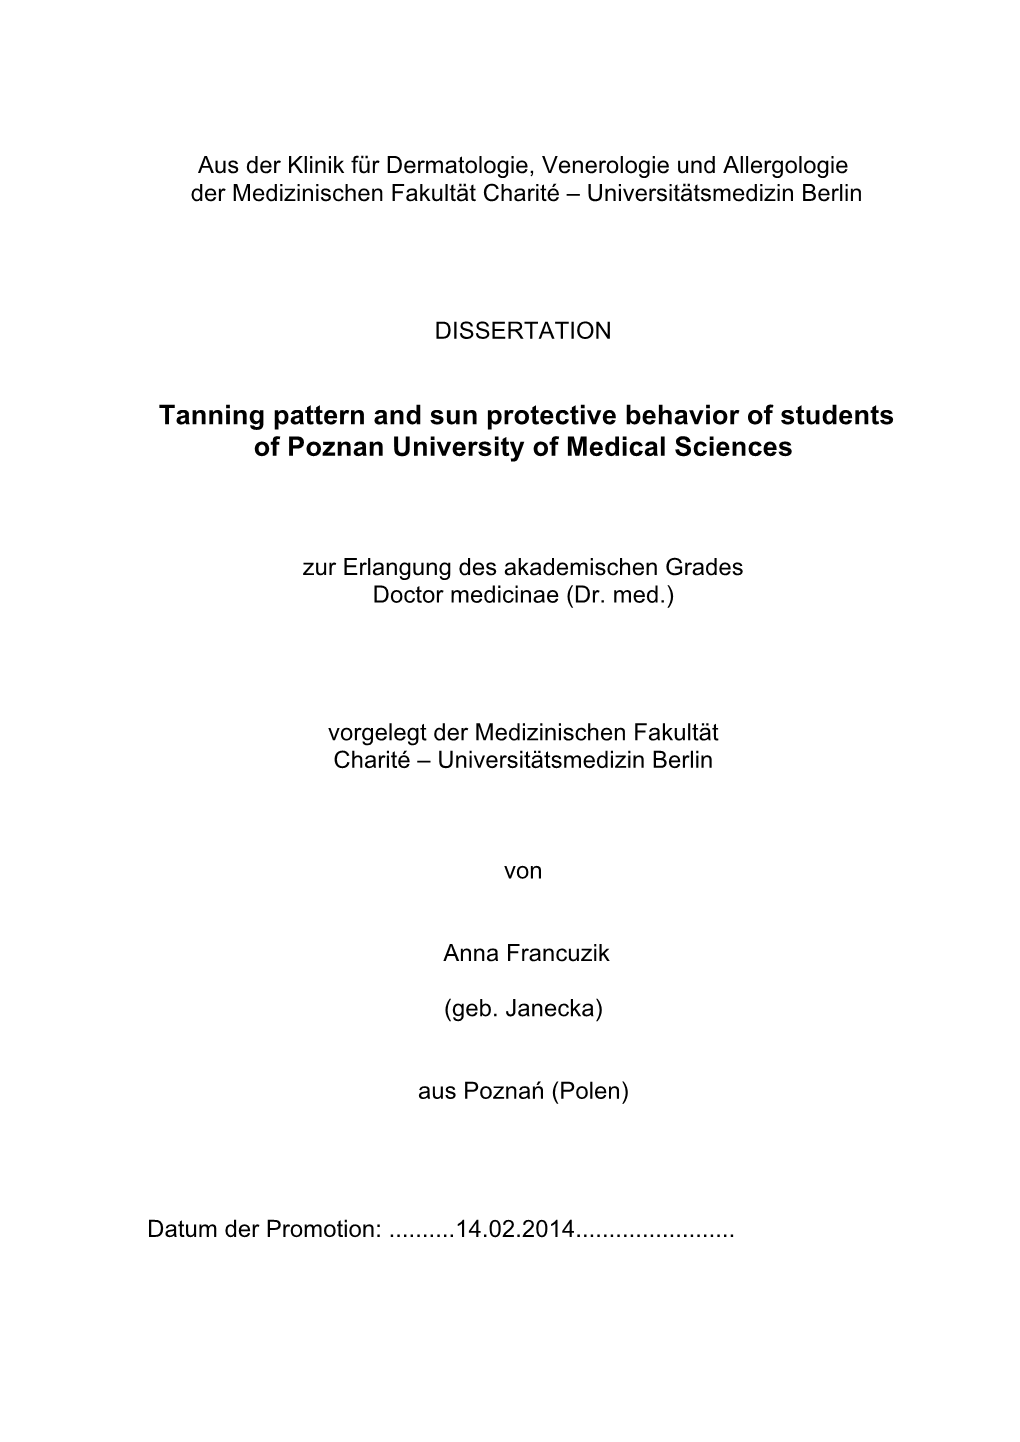 Tanning Pattern and Sun Protective Behavior of Students of Poznan University of Medical Sciences